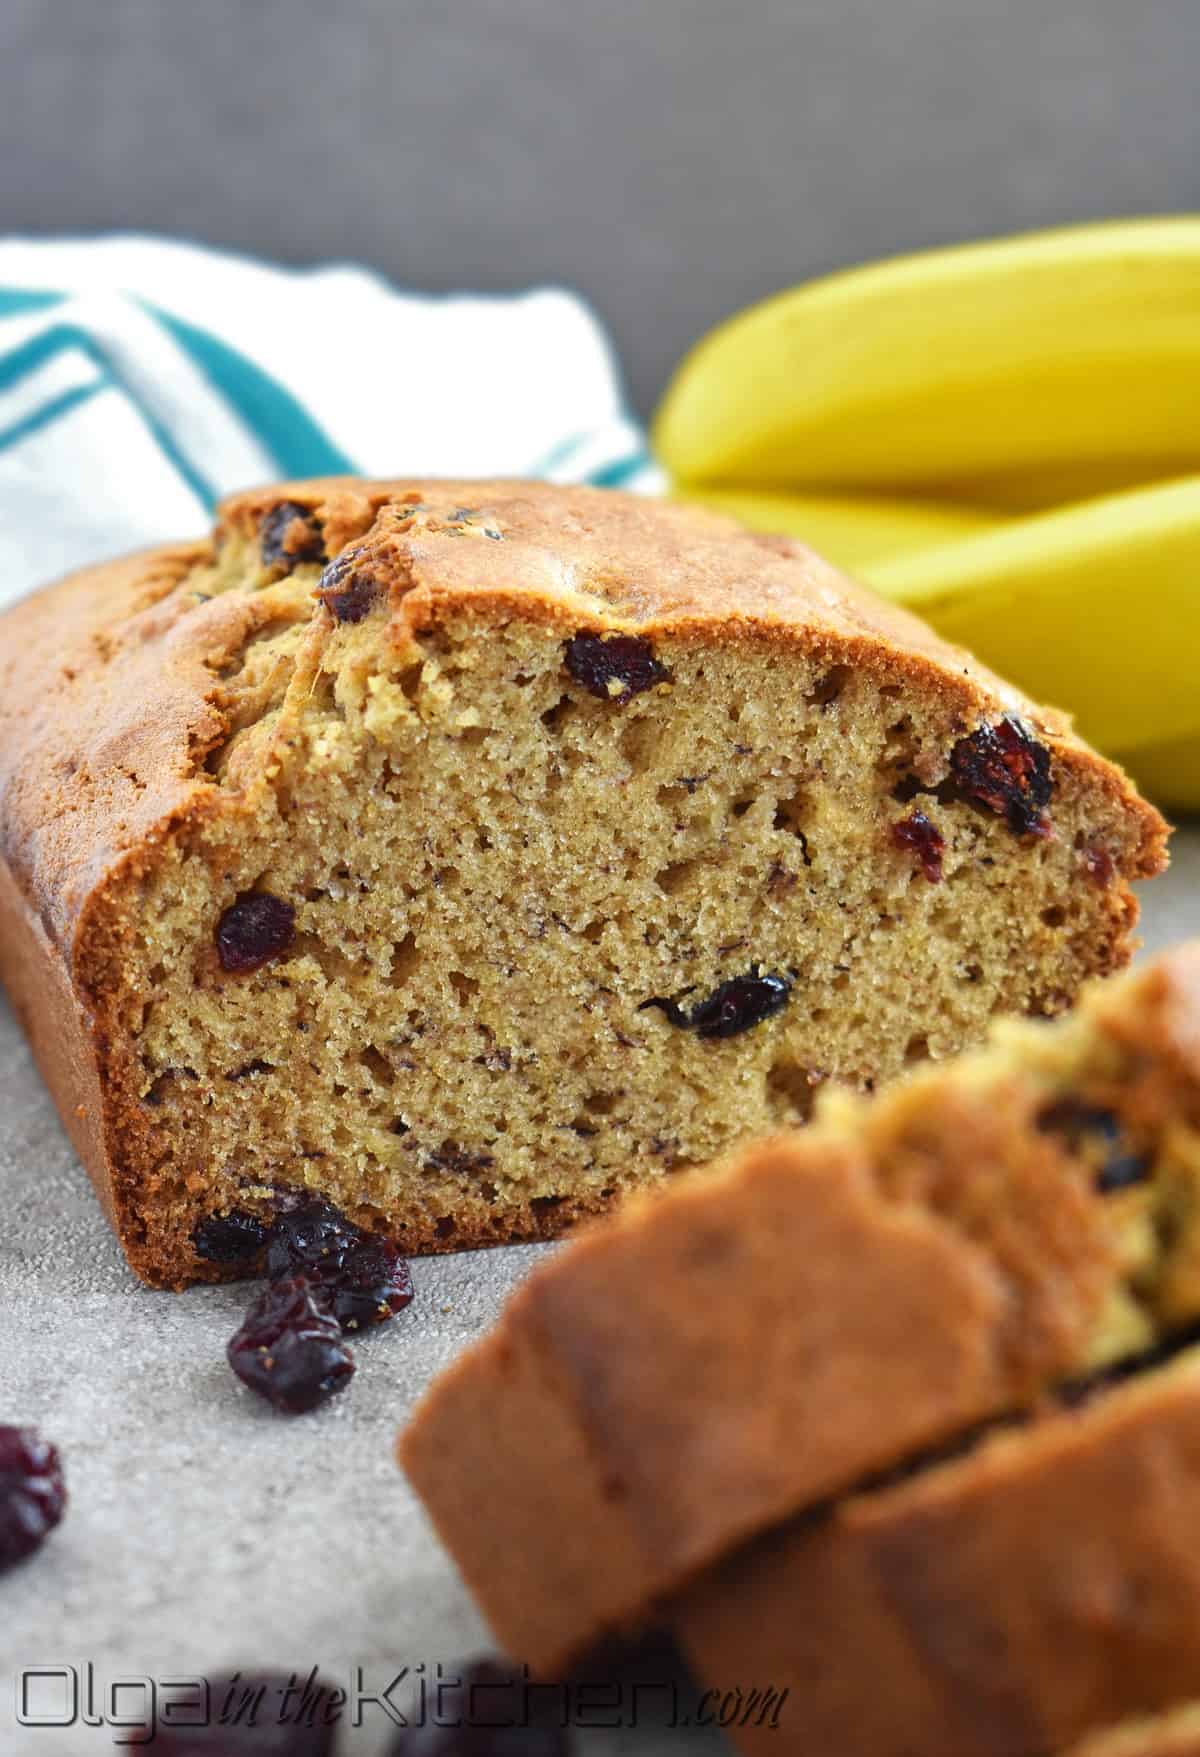 Cranberry Banana Bread is perfectly moist, slightly sweet and loaded with sweet tangy cranberries. This wonderfully moist and soft banana bread is even better with overripe bananas! #olgainthekitchen #bananabread #cranberrybread #cranberrybananabread #bananacranberrybread #bread #easyrecipe #dessert